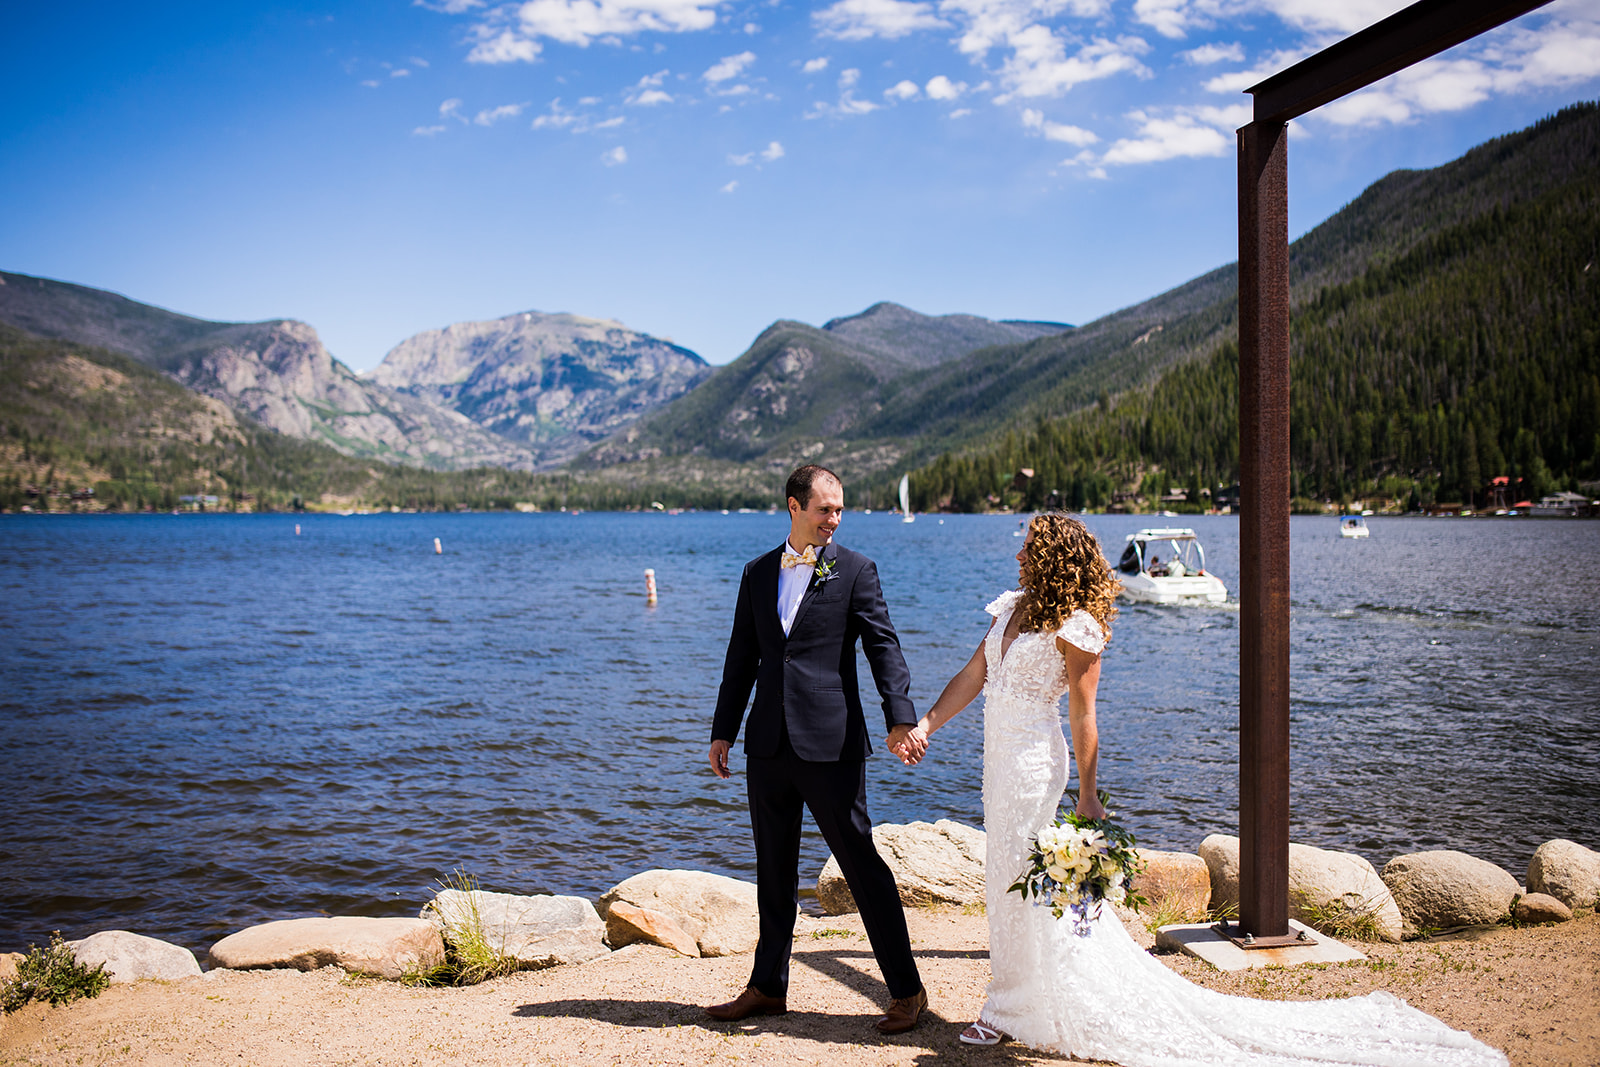 Groom leads bride as the two walk hand in hand with lake and mountain views in the background.